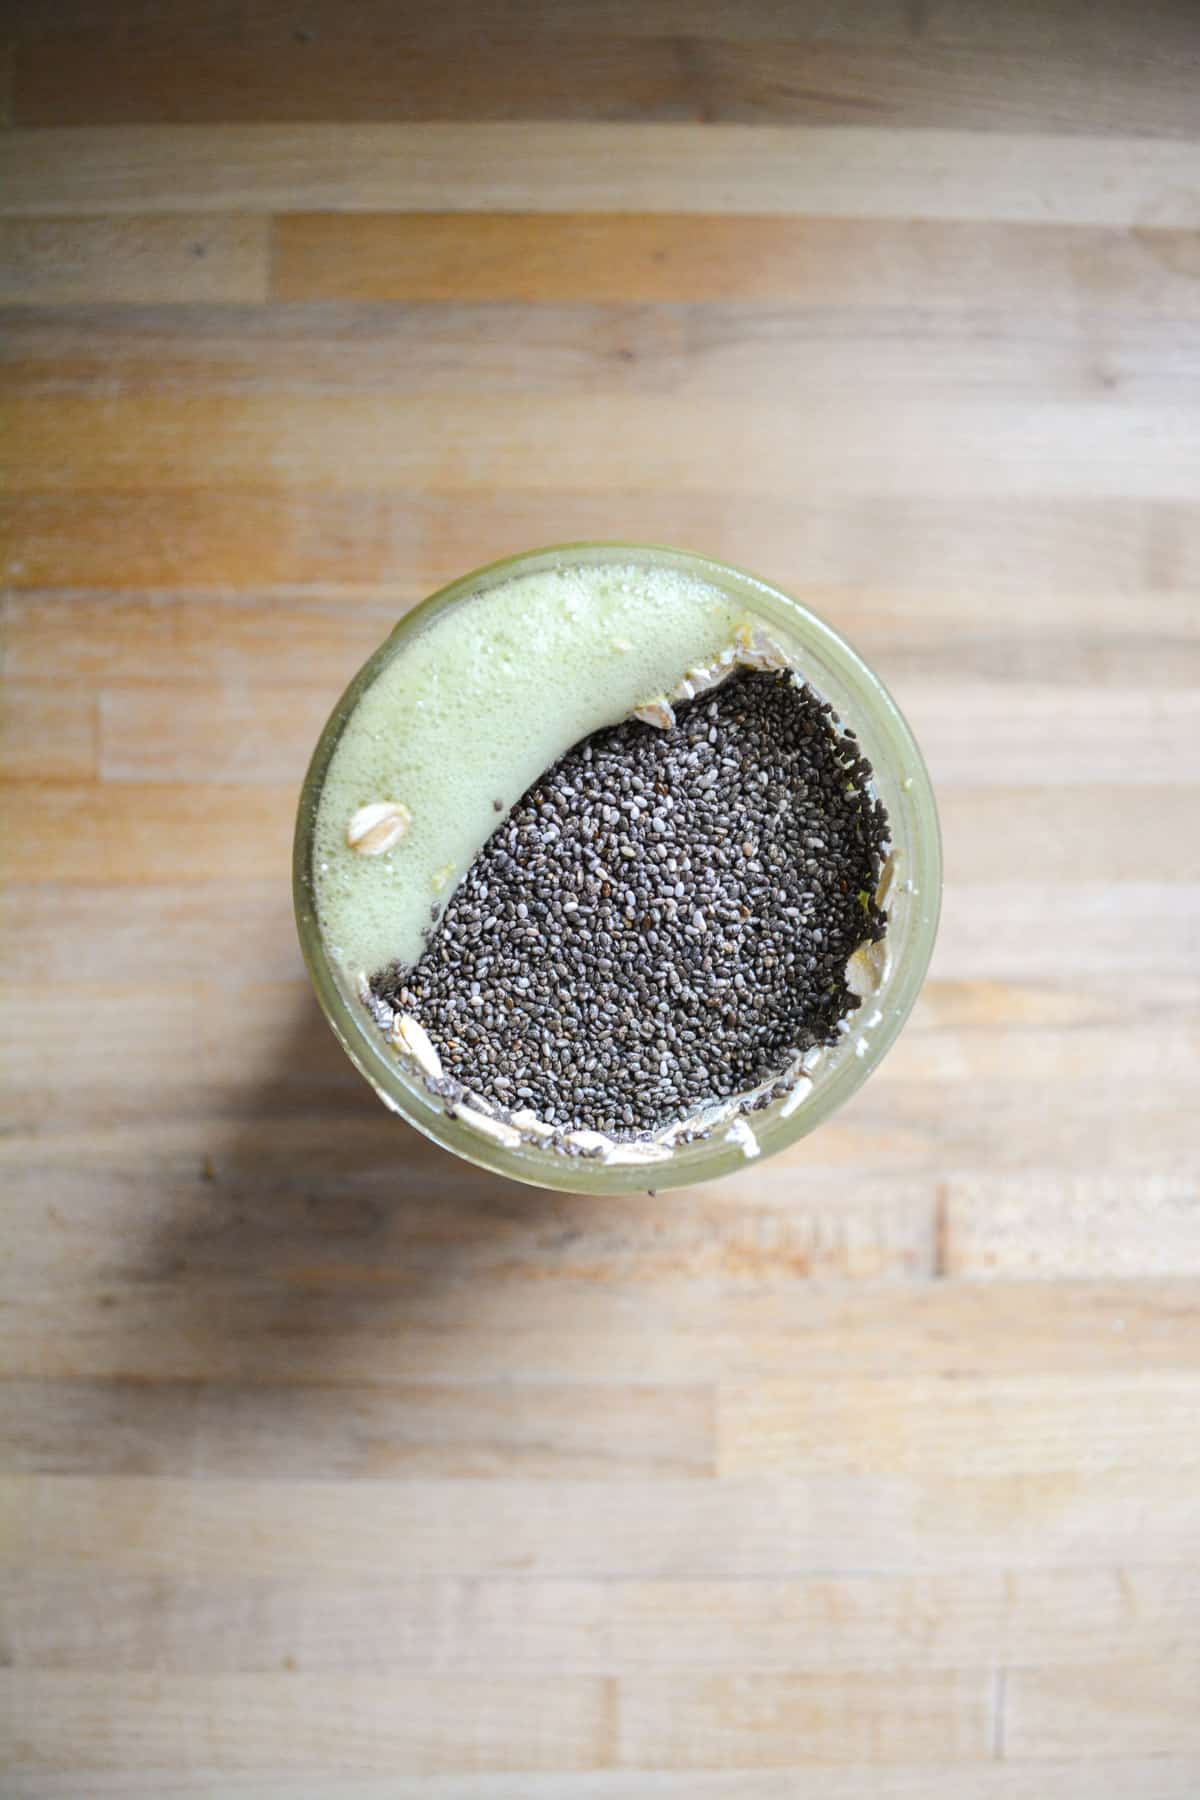 Chia seeds and oats added into the overnight oat liquid ingredients in a glass jar.